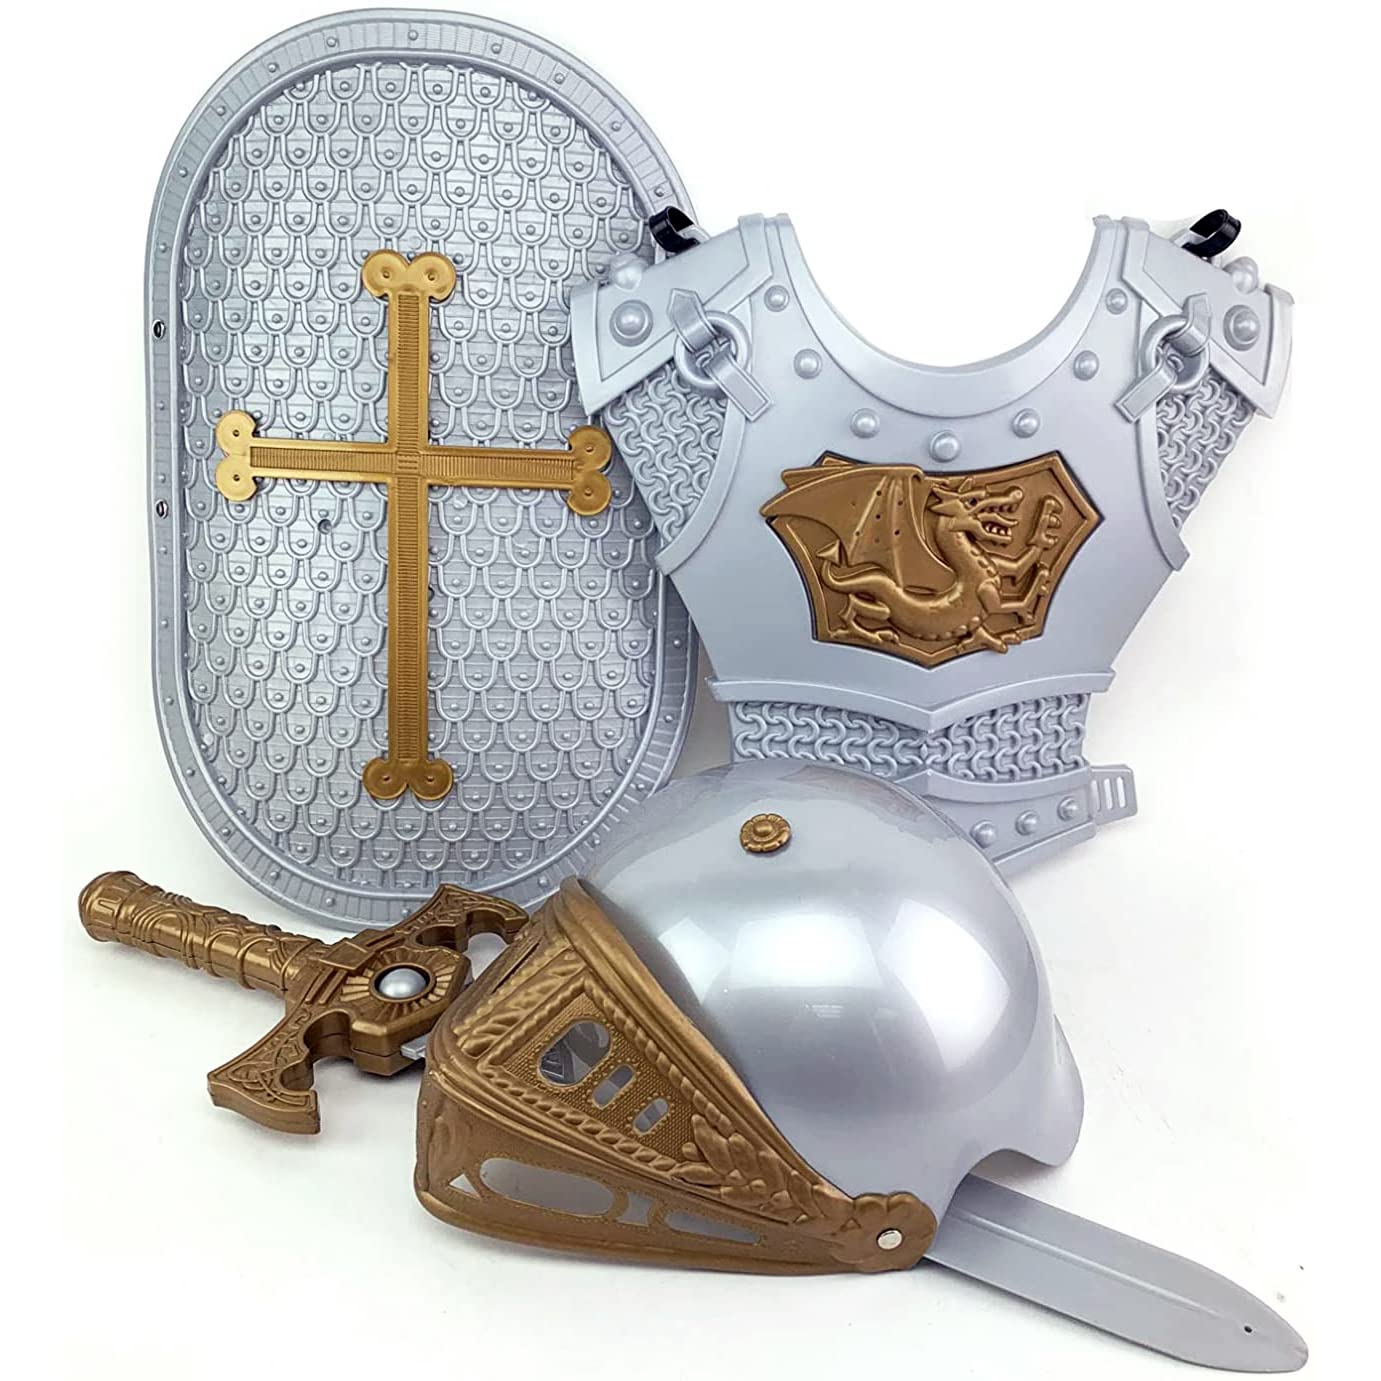 Liberty Imports Medieval Knight in Shining Armor, Kids Pretend Role Play Plastic Toy Costume Dress Up Cosplay with Weapons, Shield, Helmet and Accessories Playset